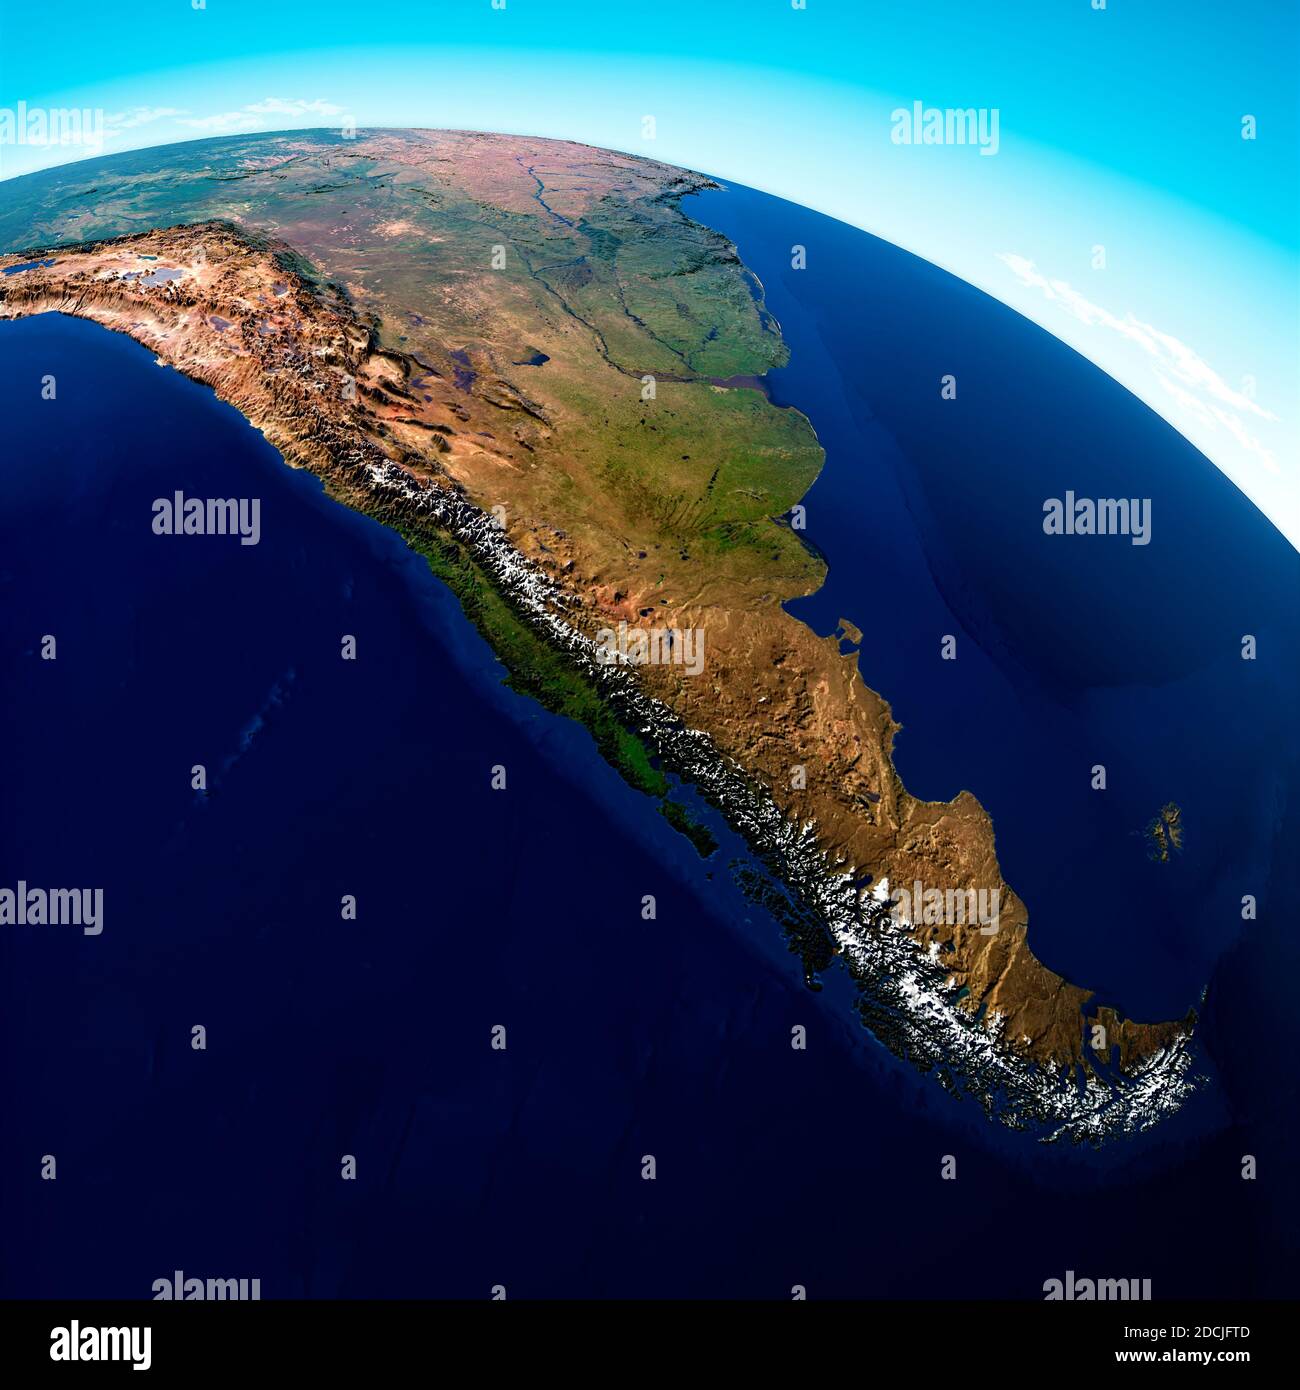 Globe map of South America, geographical map, physics. Cartography, atlas. Map with reliefs and mountains. Argentina, Chile. Satellite view Stock Photo